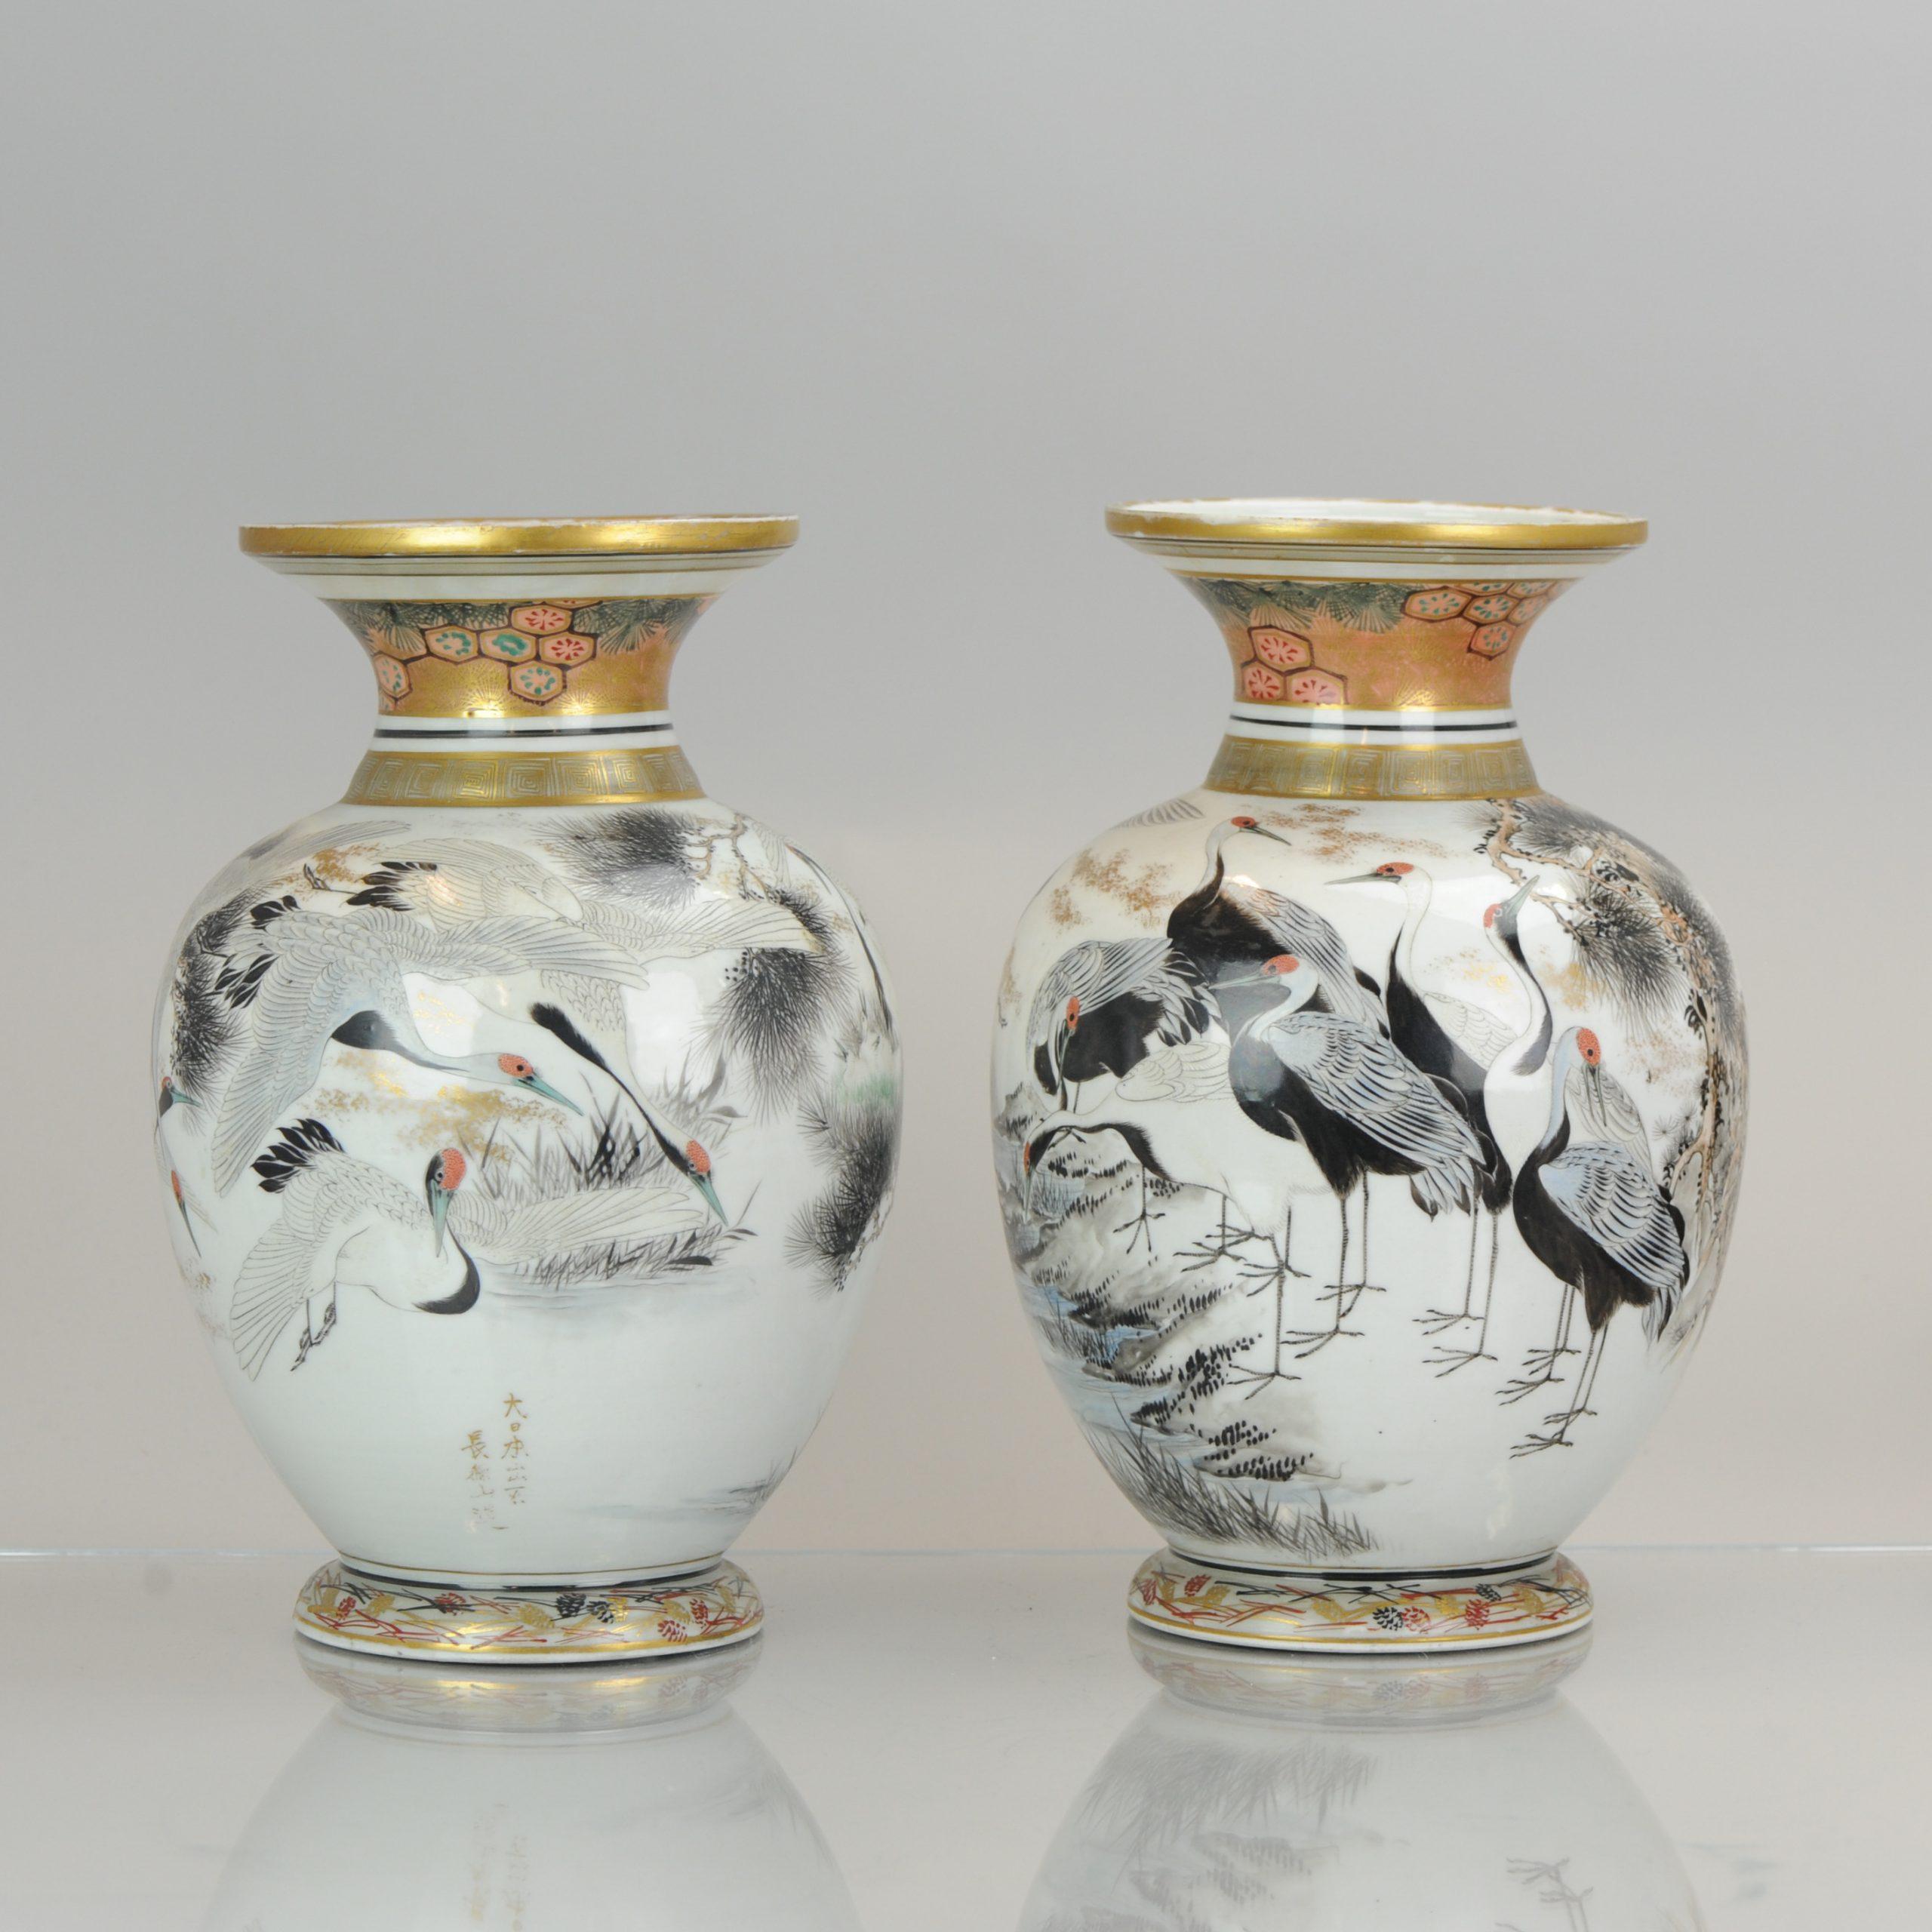 Fabulous Japanese vases. A pair of very nice 19th century porcelain vases in Satsuma style. I think they are actually Kutani but the rim decoration is very much a reference to Satsuma ware. They are both fully decorated with cranes, not mirroring